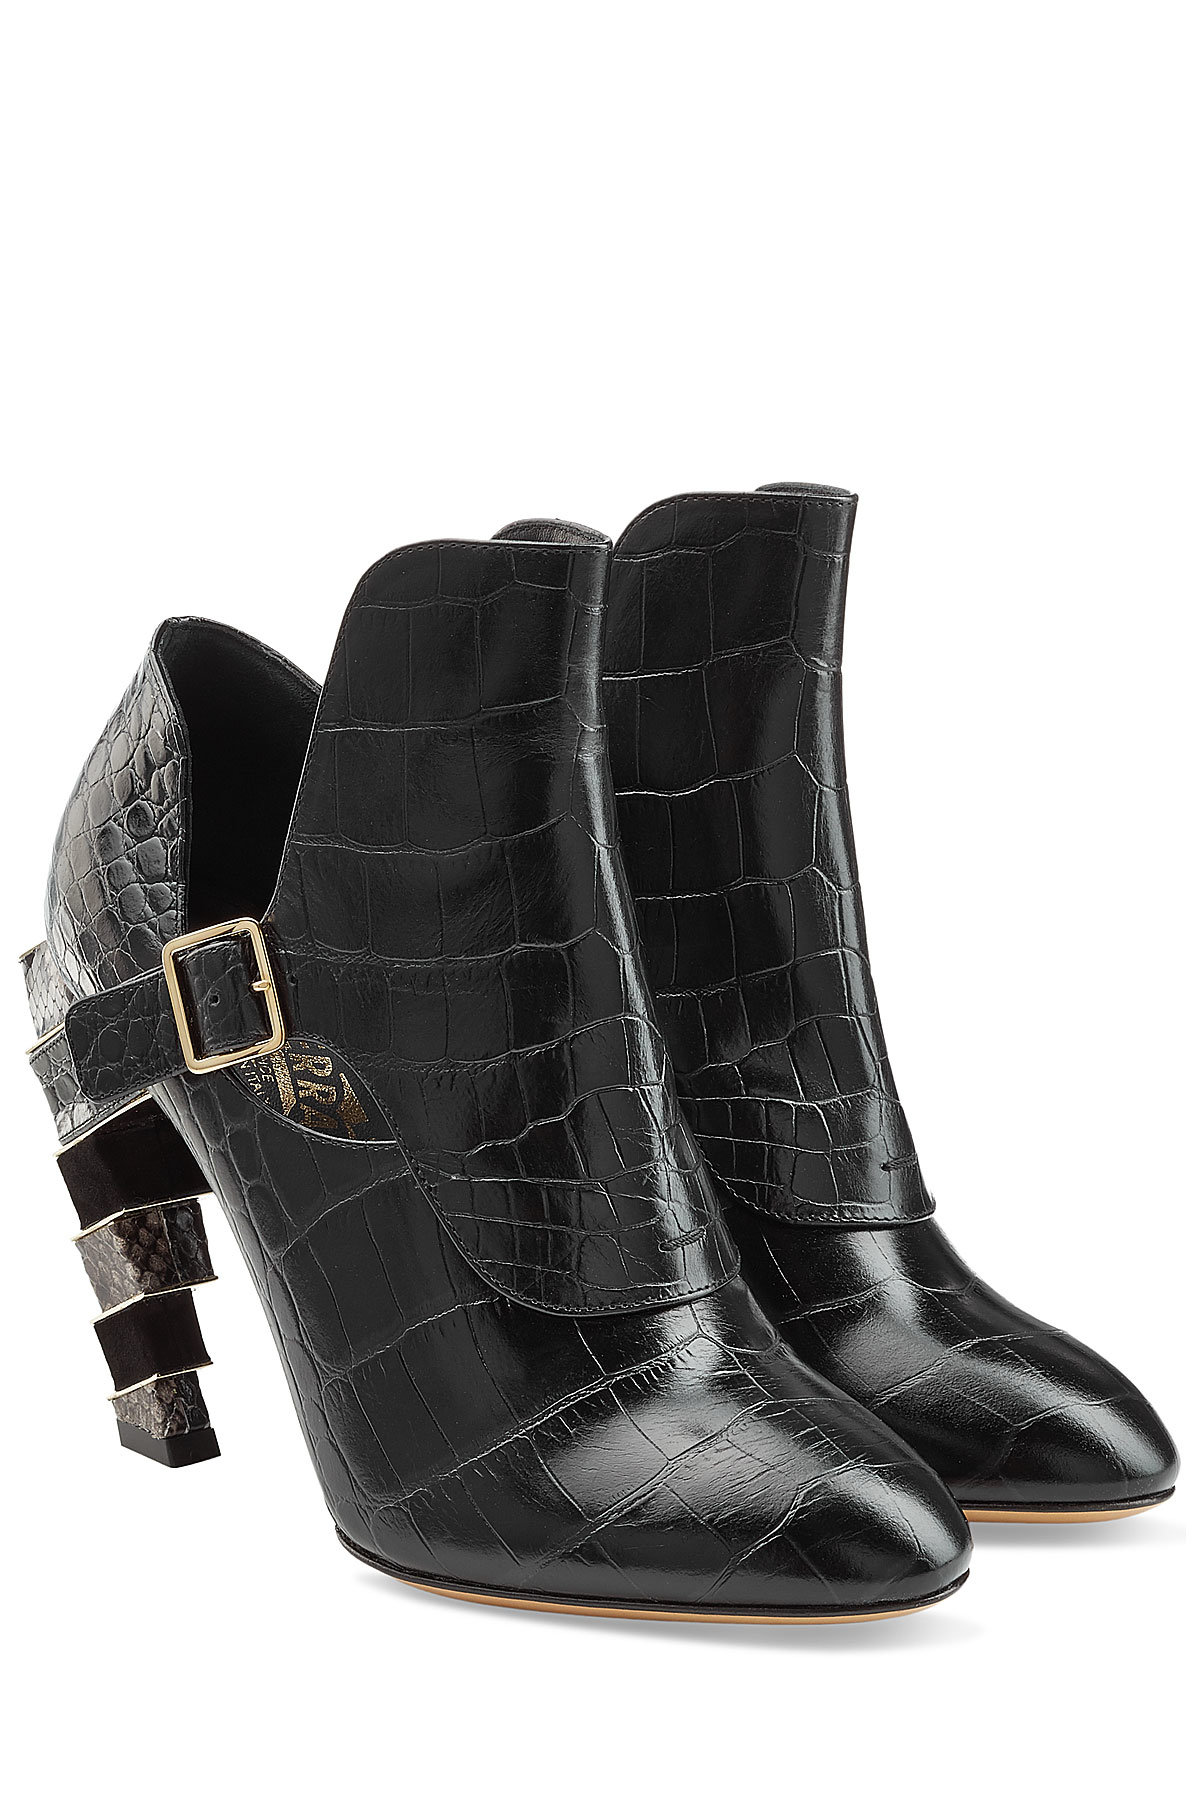 Salvatore Ferragamo - Embossed Leather Ankle Boots